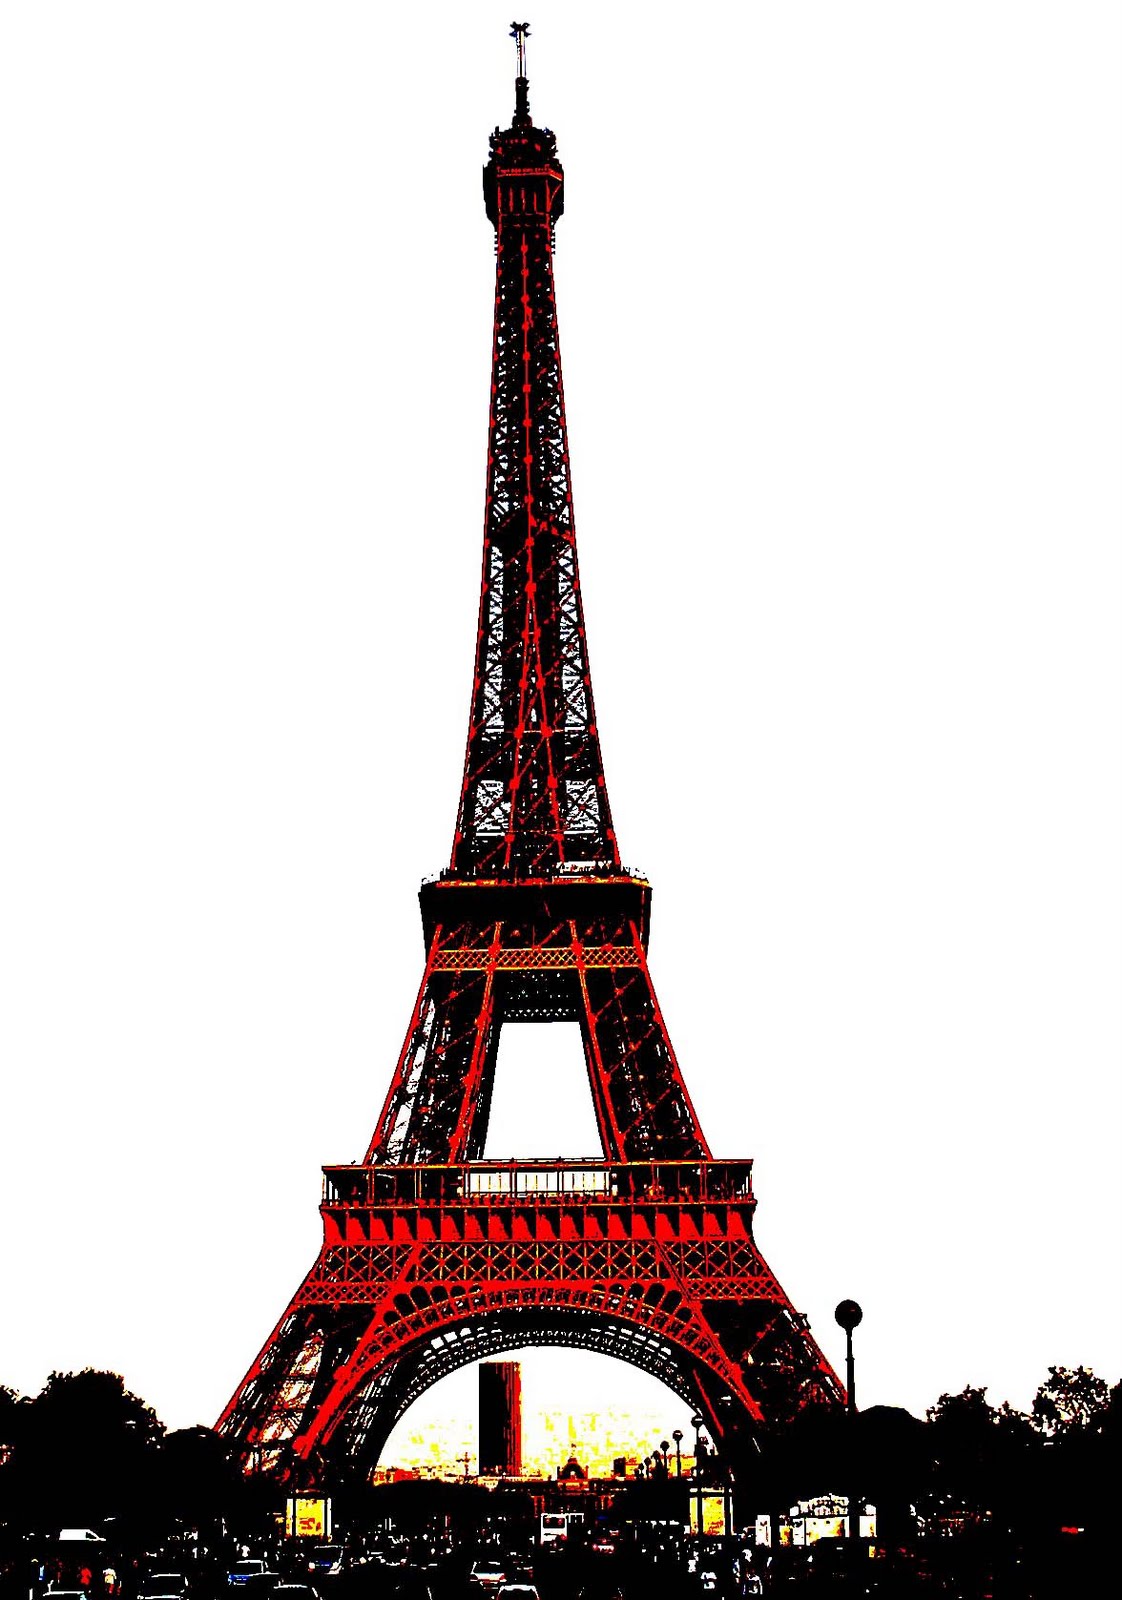 Stock Pictures: Eiffel Tower sketches and silhouettes